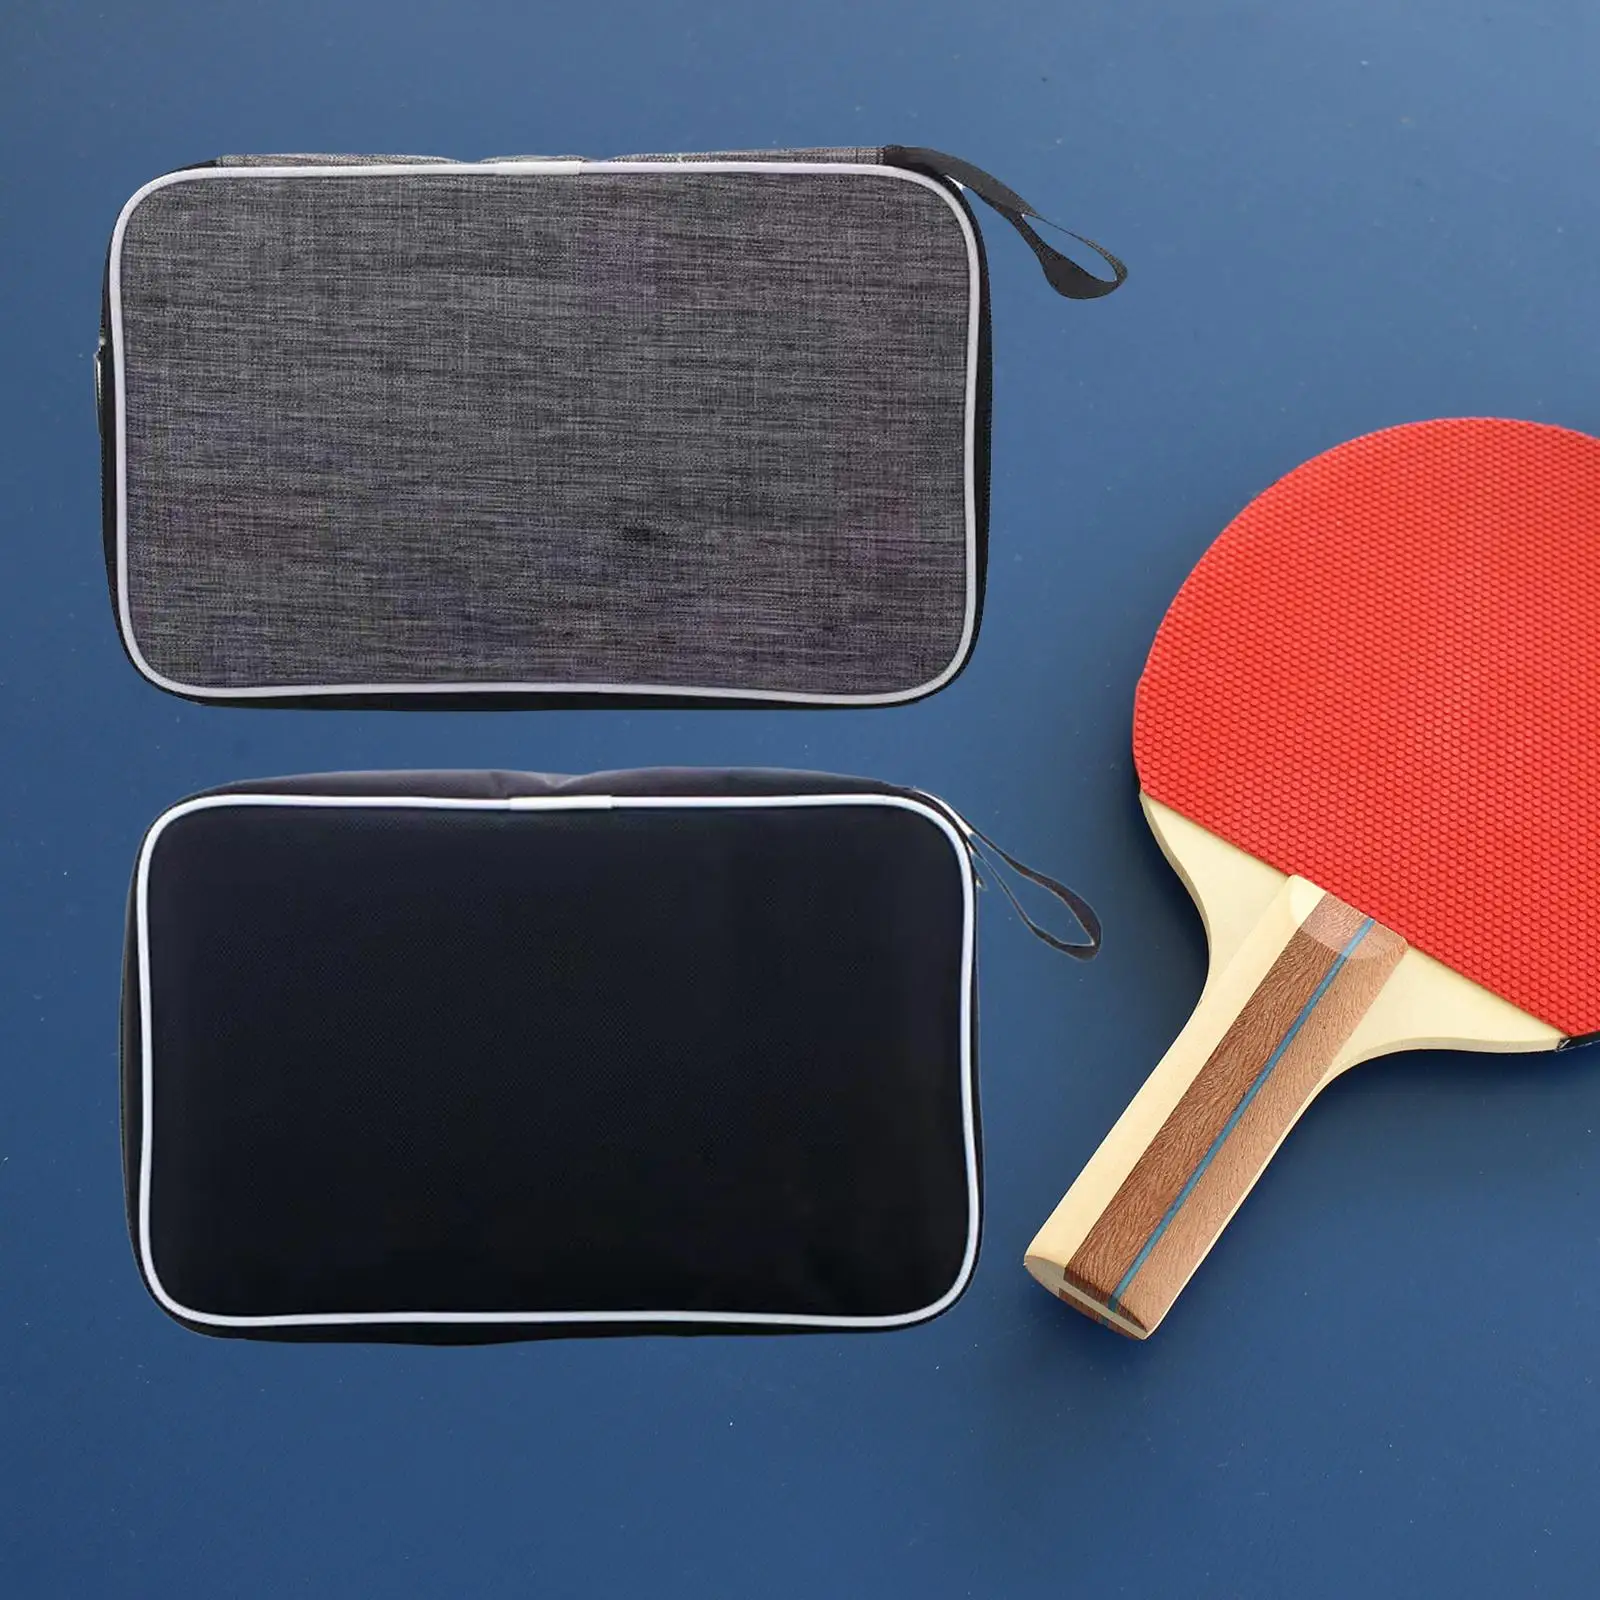 Ping Pong Paddles Case Lightweight Outdoors for Training Competition Outdoor